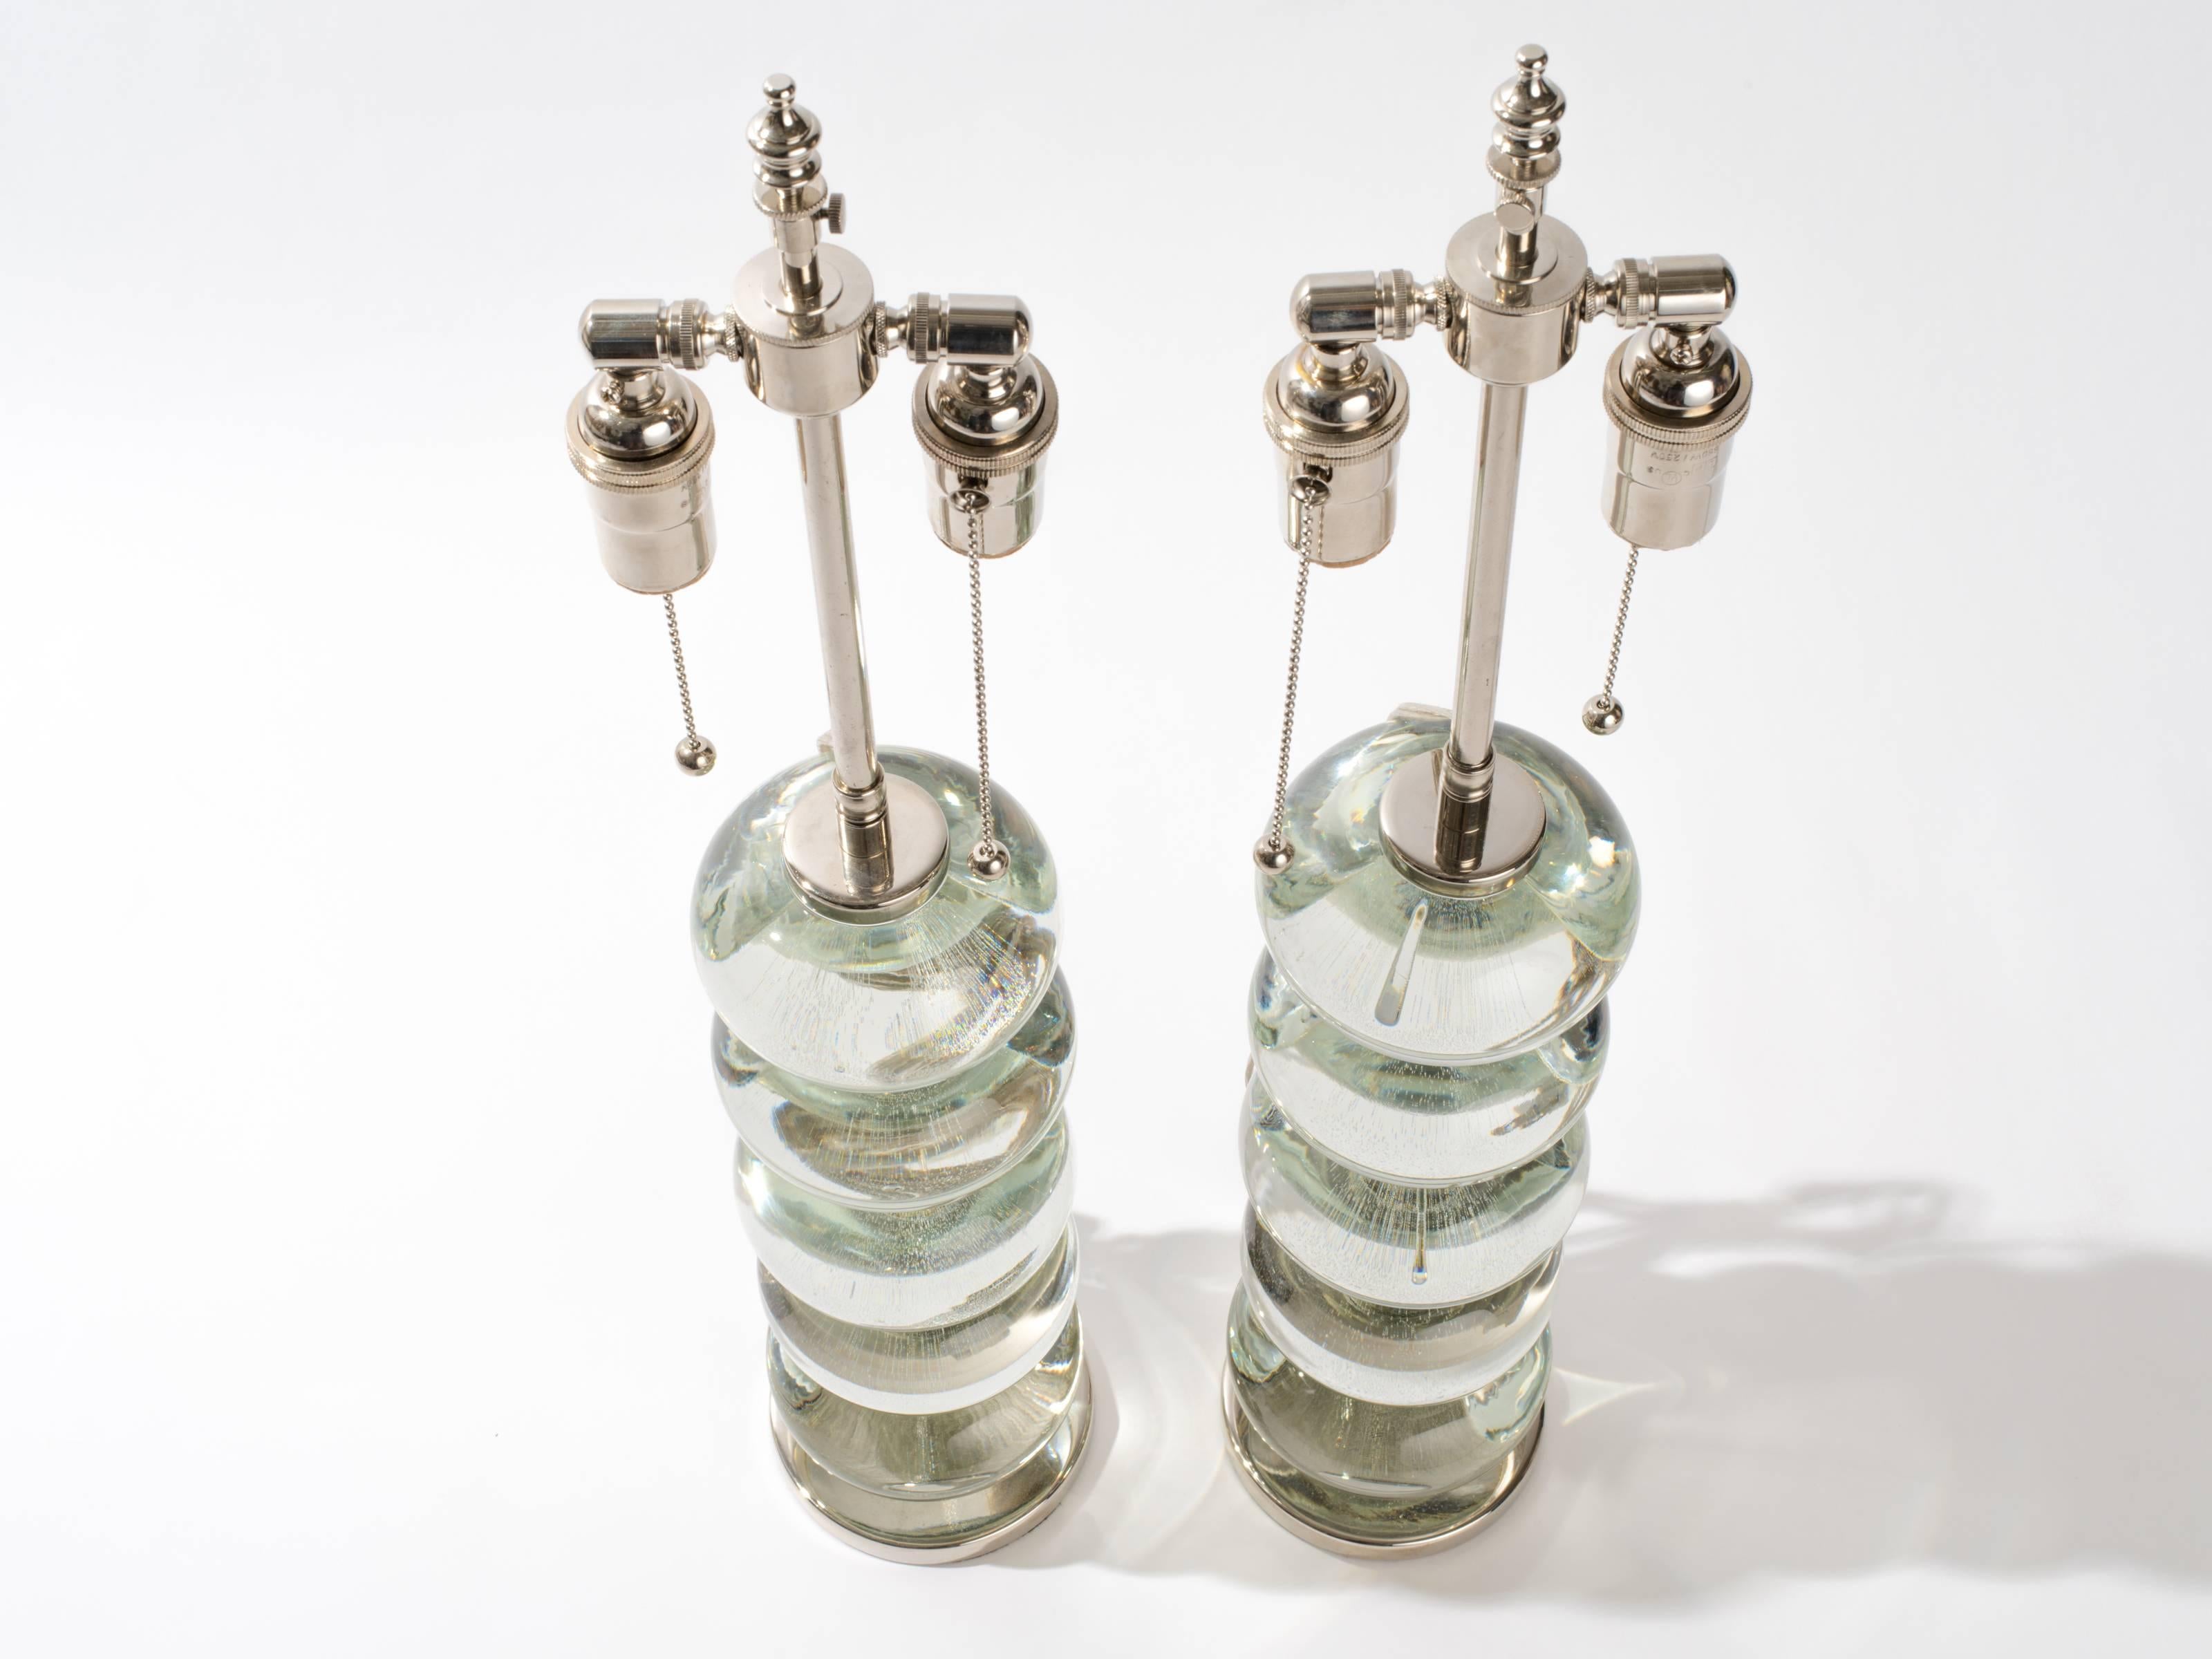 Hand-Crafted Sculpture Amorphic Solid Glass Lamps For Sale